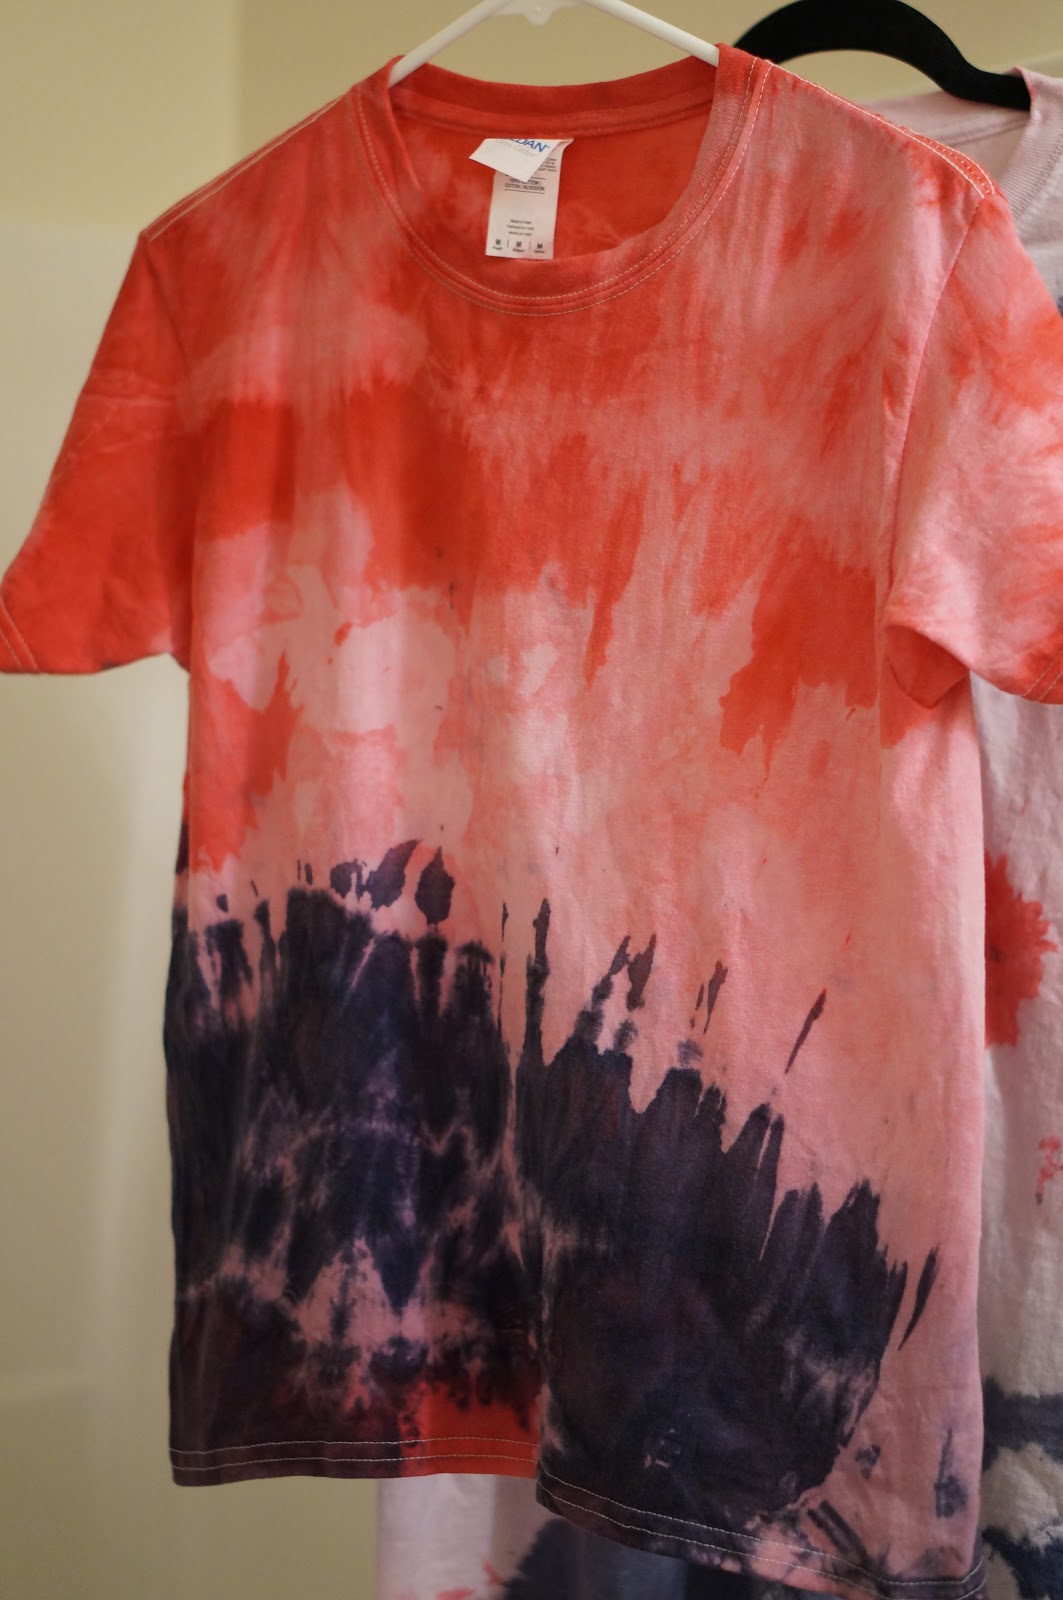 FAMILY | TIE DYE SHIRTS FOR THE 4TH OF JULY - Rebecca Lately